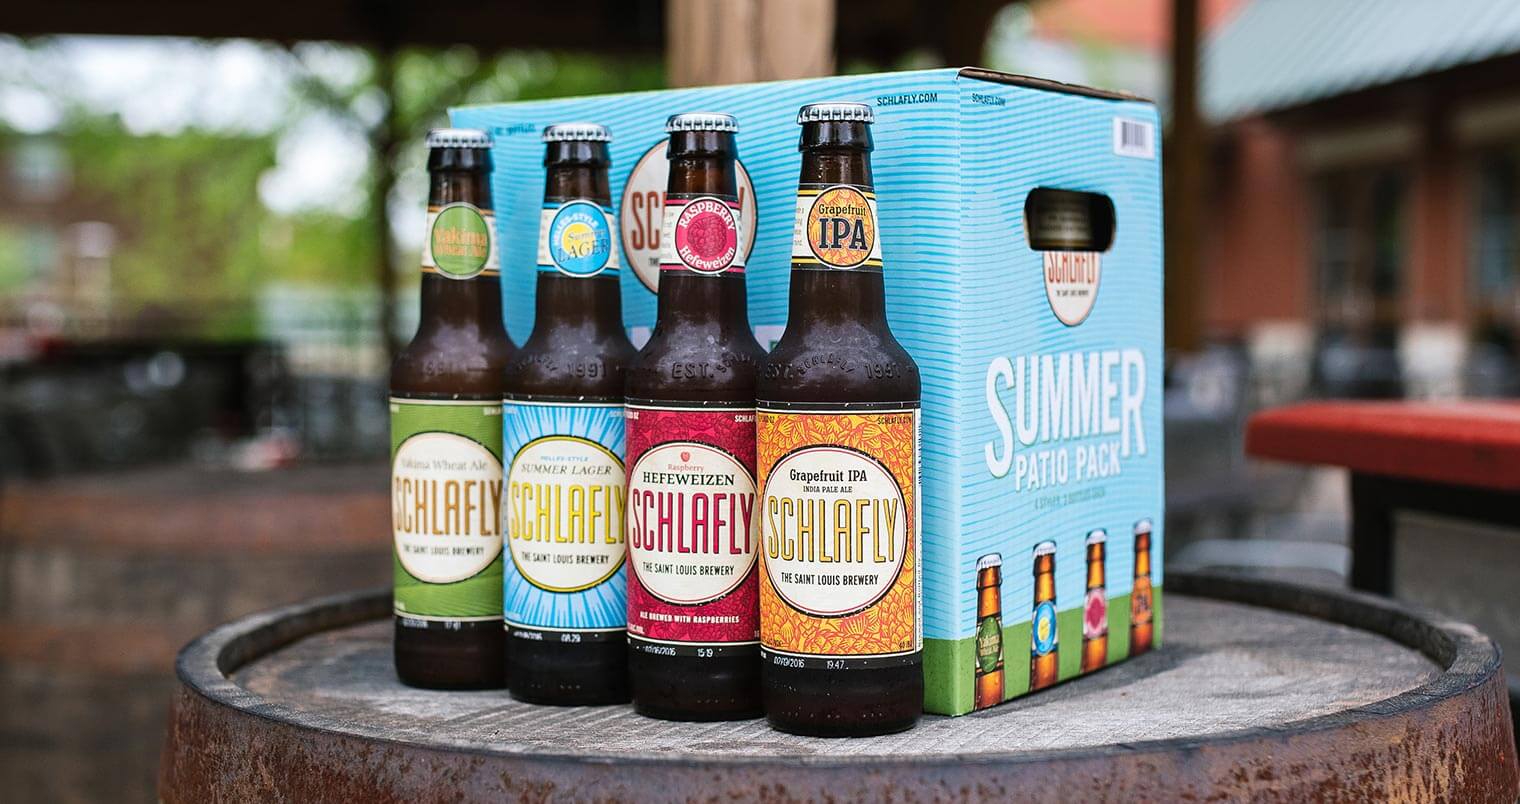 Schlafly Beer Releases Summer Patio Pack Sampler, featured image